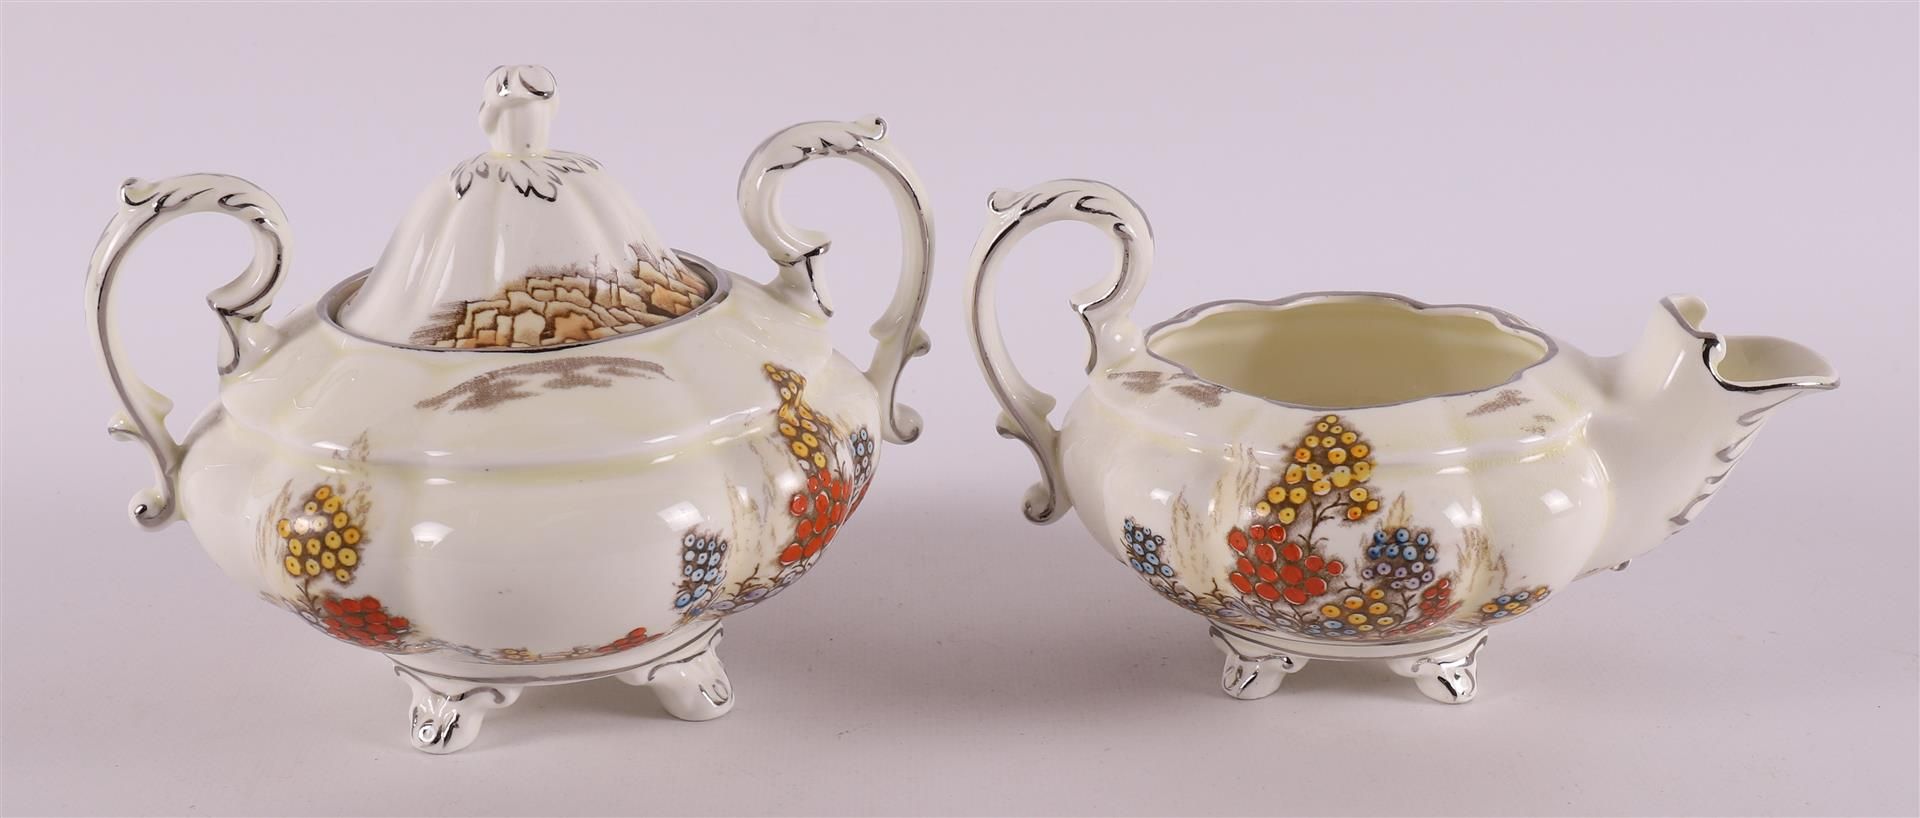 A creamware teapot with sugar bowl and milk jug, England, Stafford, 20th century - Image 8 of 12